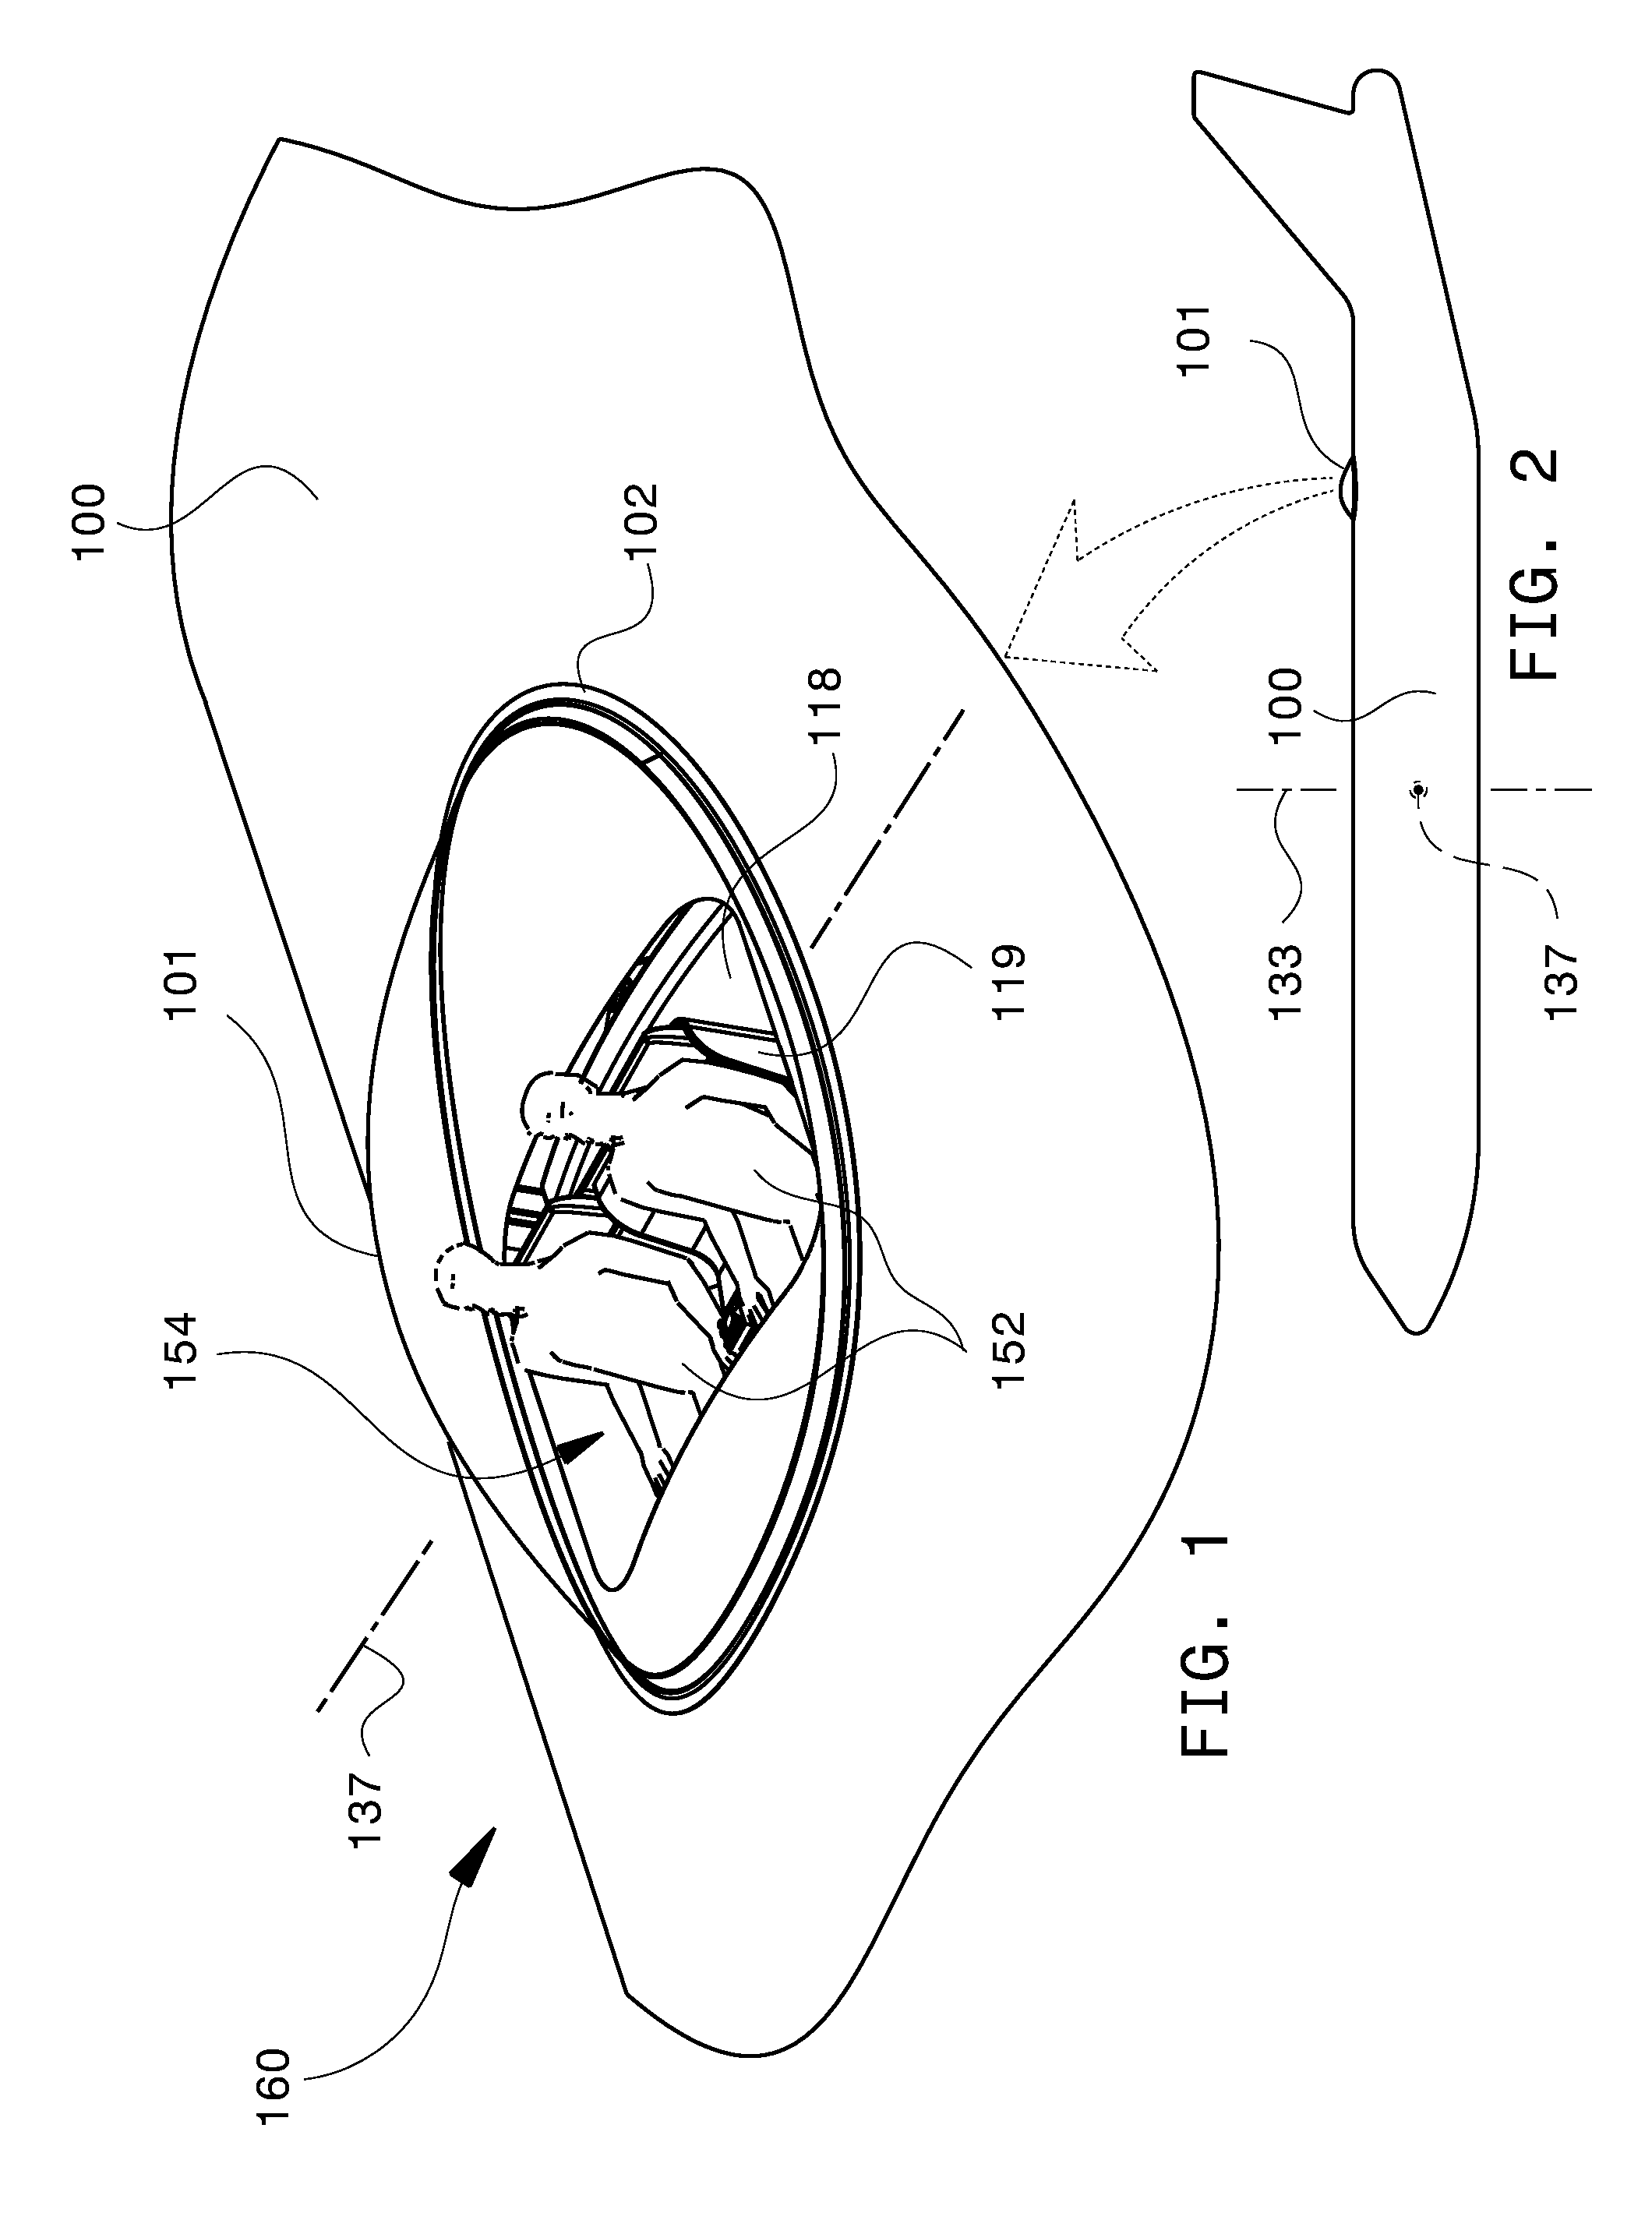 Aircraft external viewing system, apparatus, and method